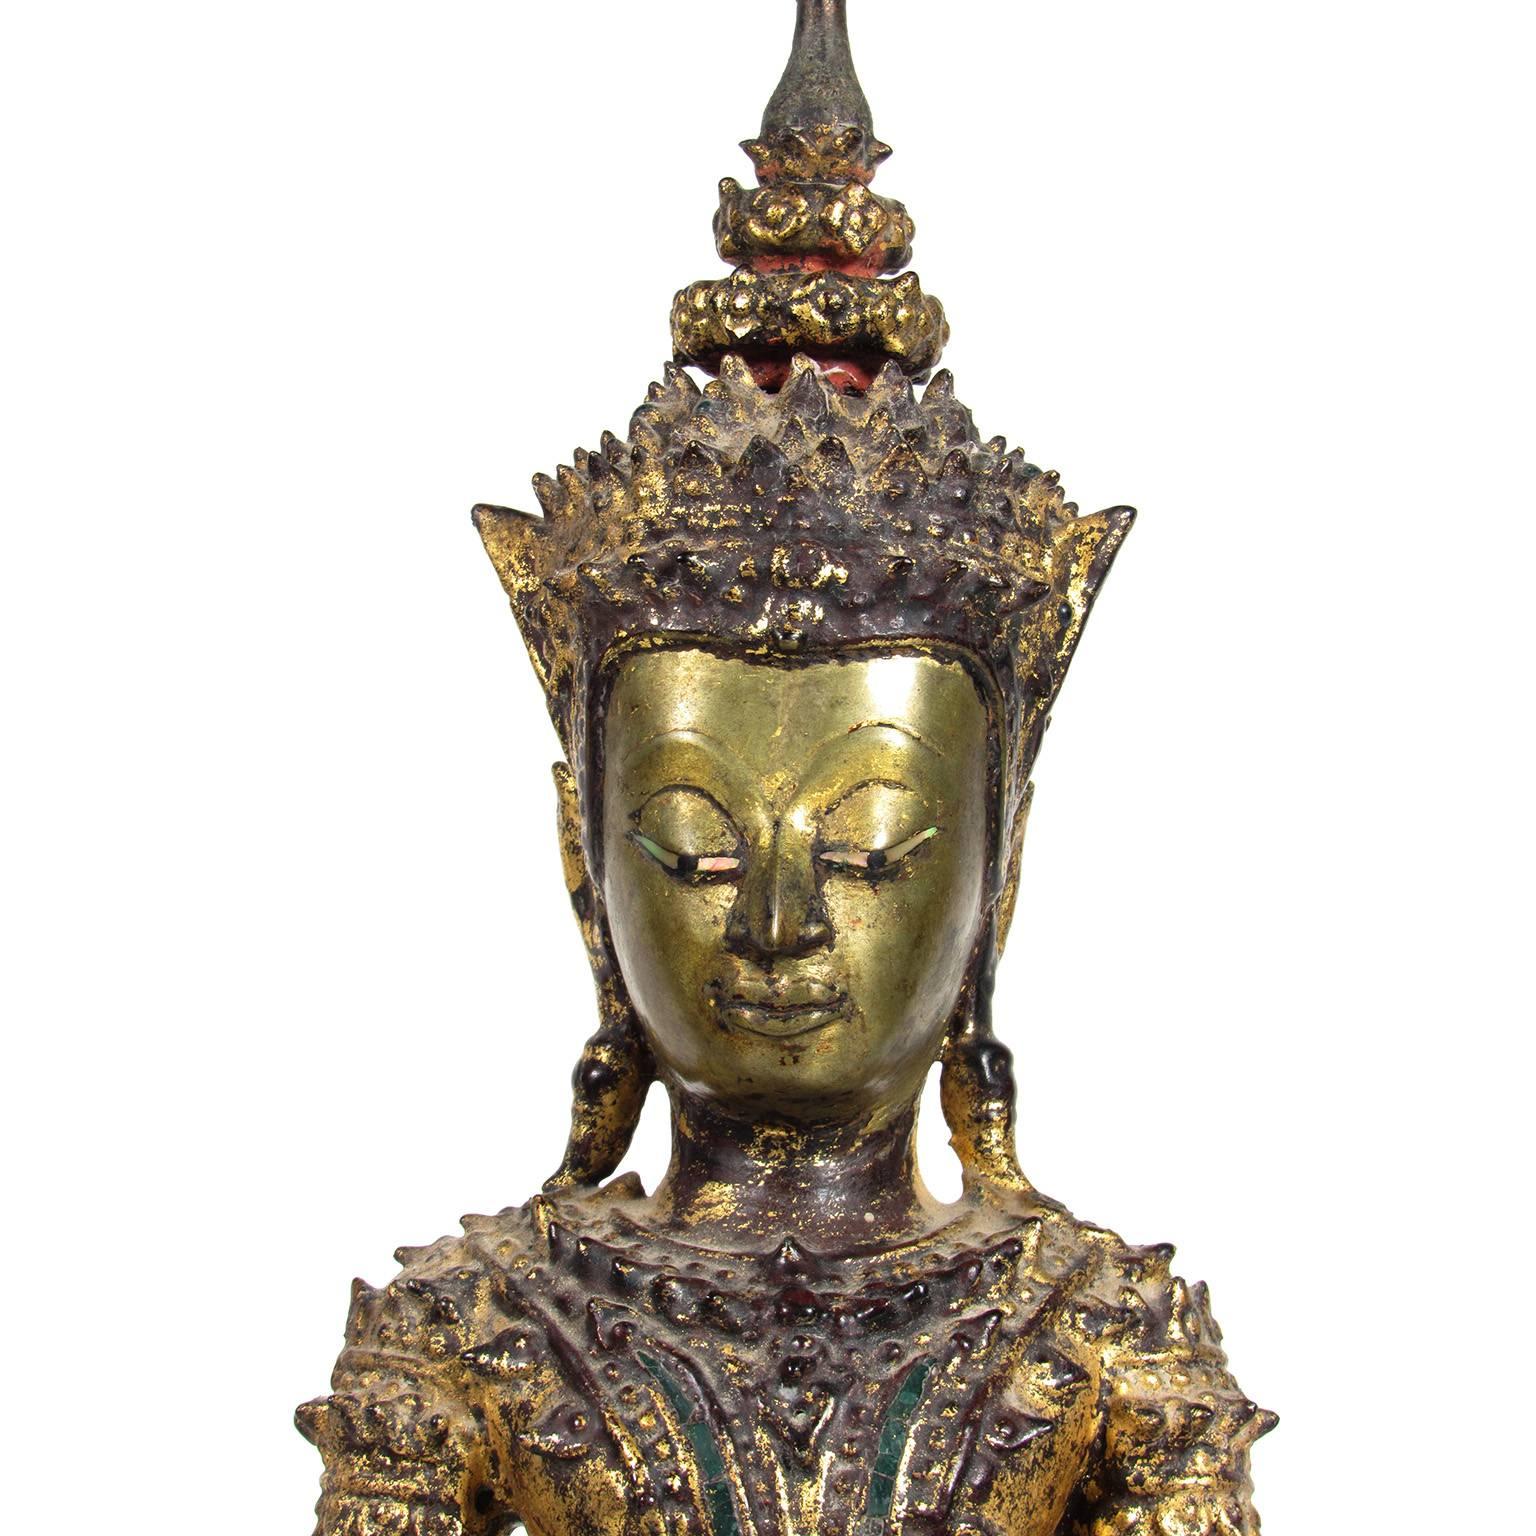 Antique gilt bronze statue of Thai version of Buddha. Figure seated on a lotus with a double cushion base, inset with colored green glass panels and remnants of red paint. With reliquary top. Provenance available to buyer. Measures: Height 23 in.